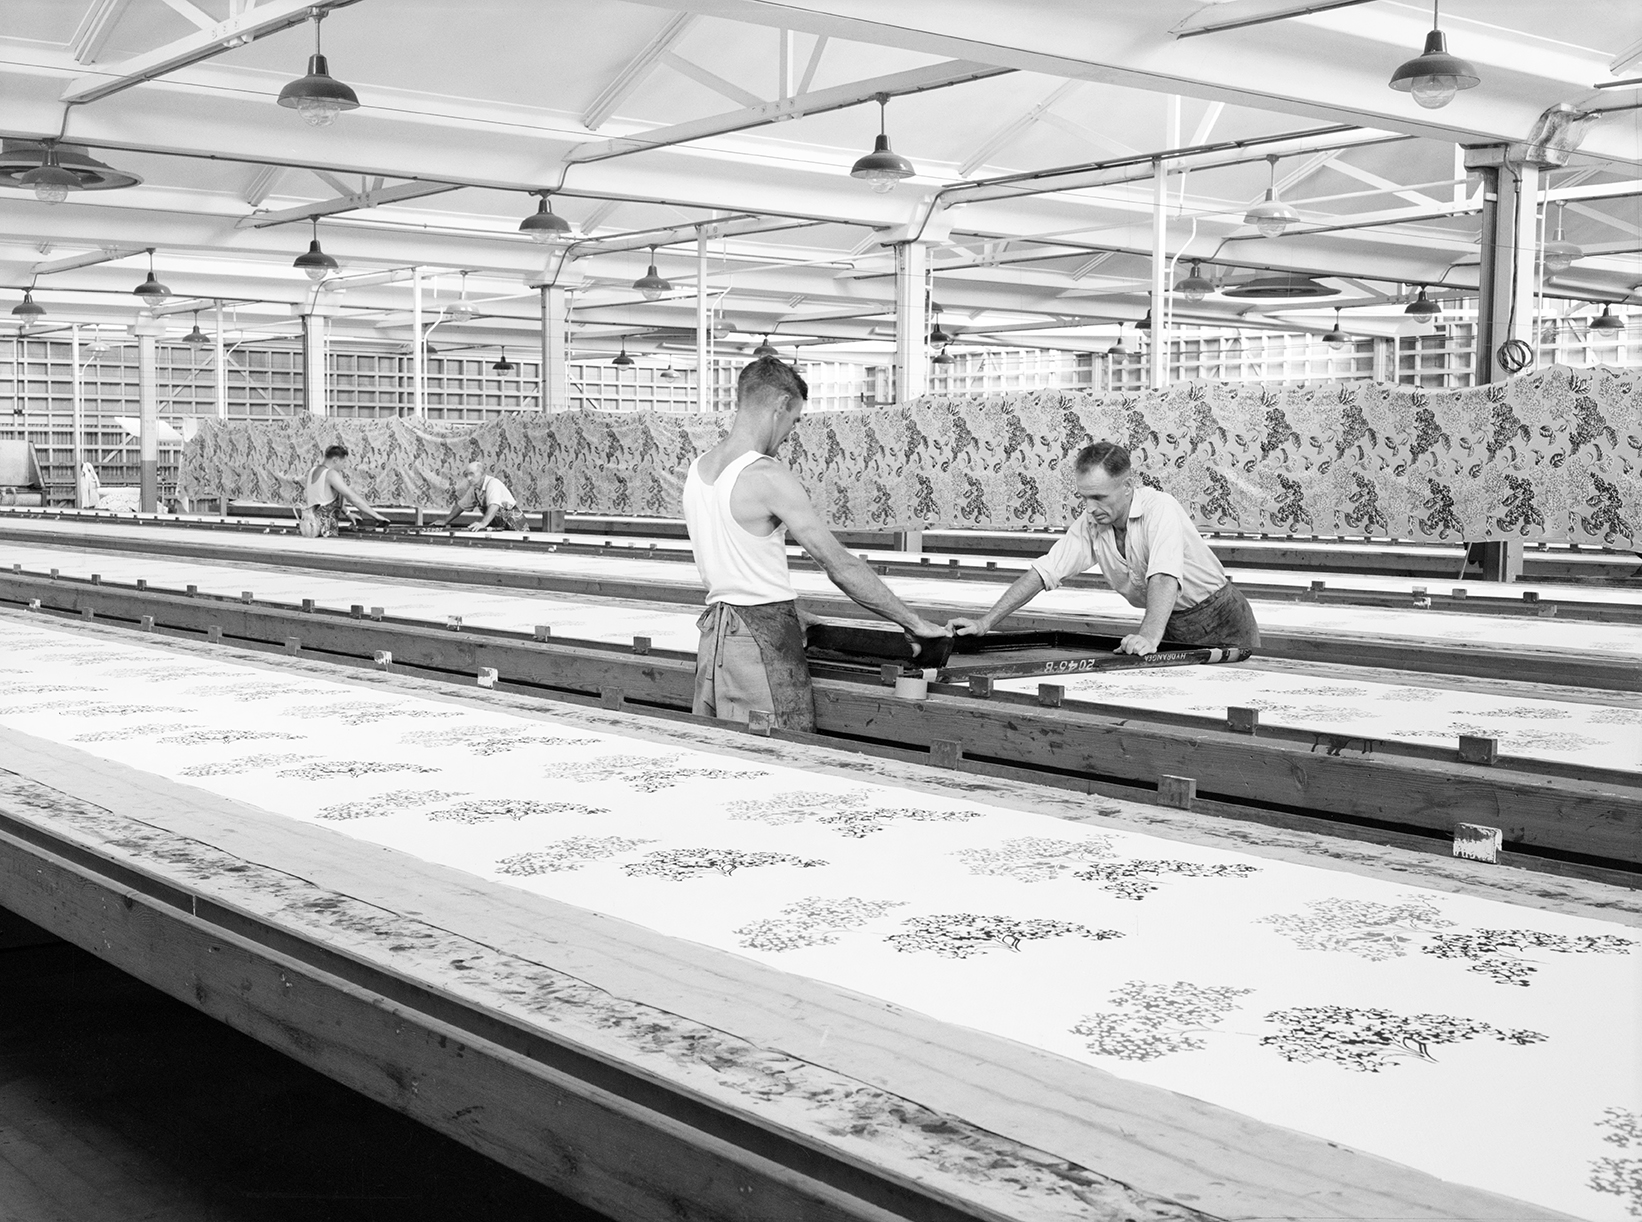 Printing fabric at the factory of Impression Textiles Ltd, Penrith by Max Dupain, 1948